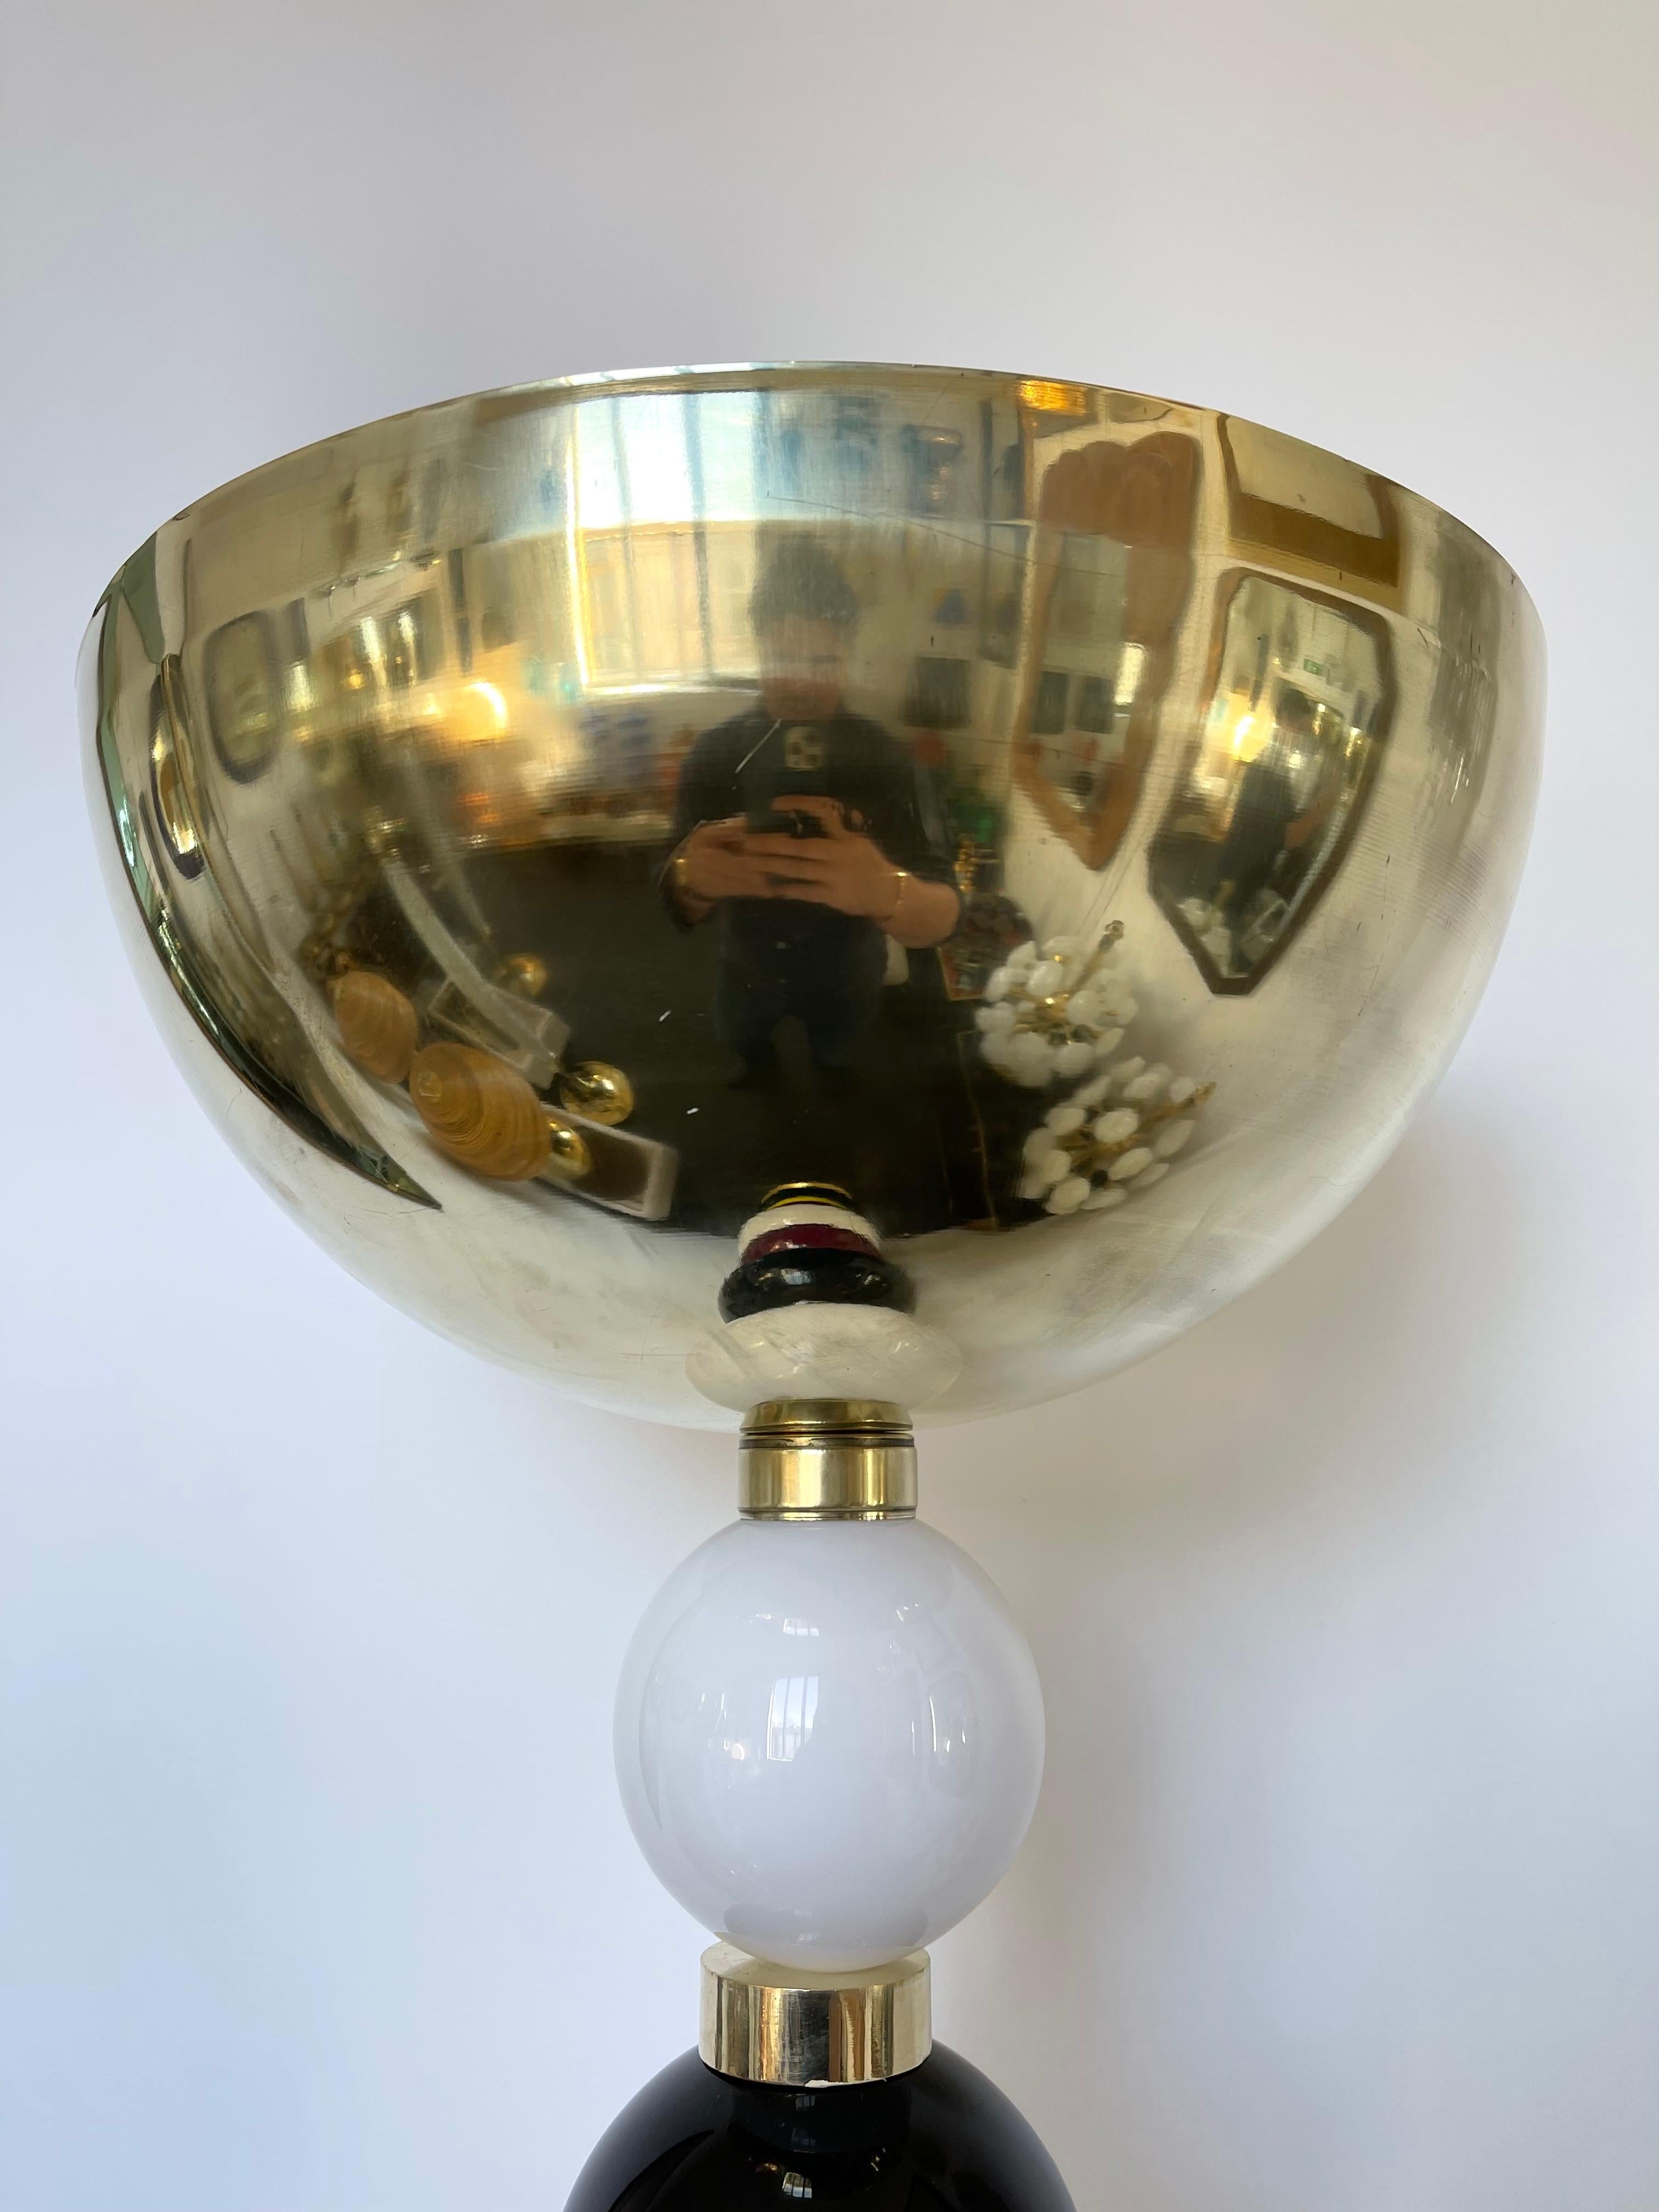 Brass floor lamp with color atomo ball Murano glass, large full brass shade, nice wood detail on base. Contemporary work from a small italian artisanal workshop. In the mood of Venini, Mazzega, La Murrina, Veronese, Seguso, Barovier Toso.

The